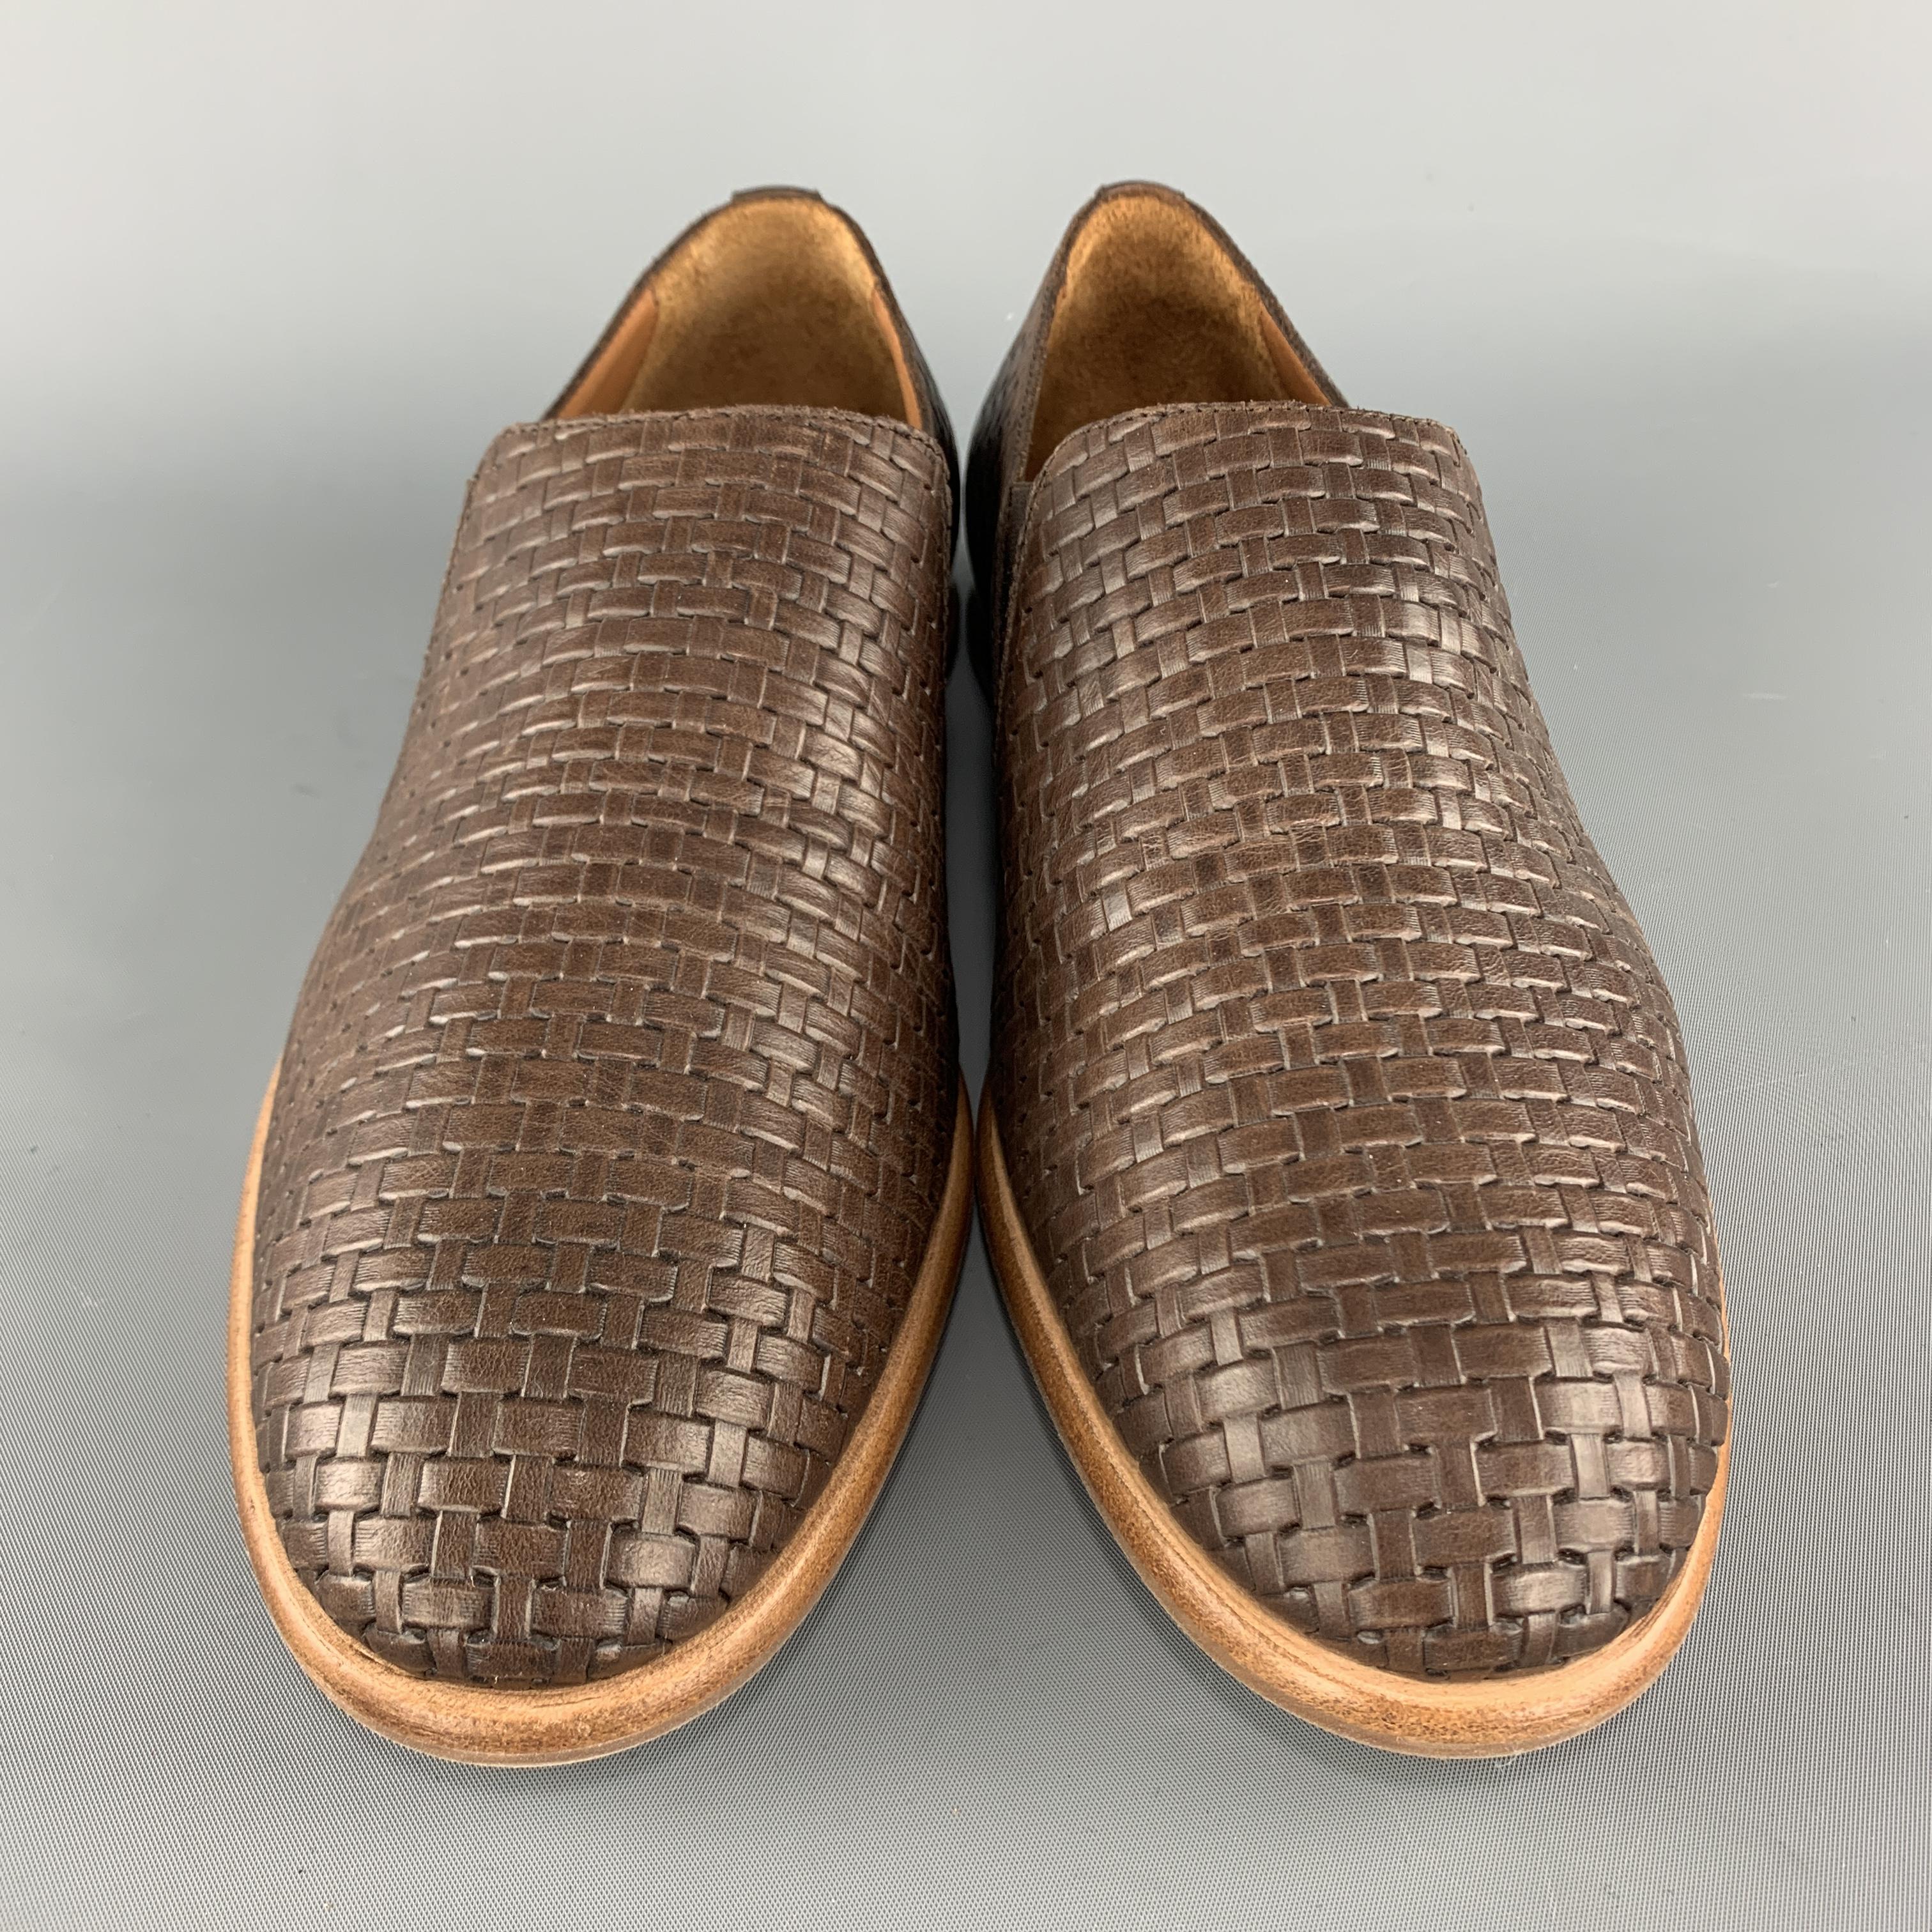 Men's AQUATALIA Size 10 Brown Woven Leather Slip On Loafers